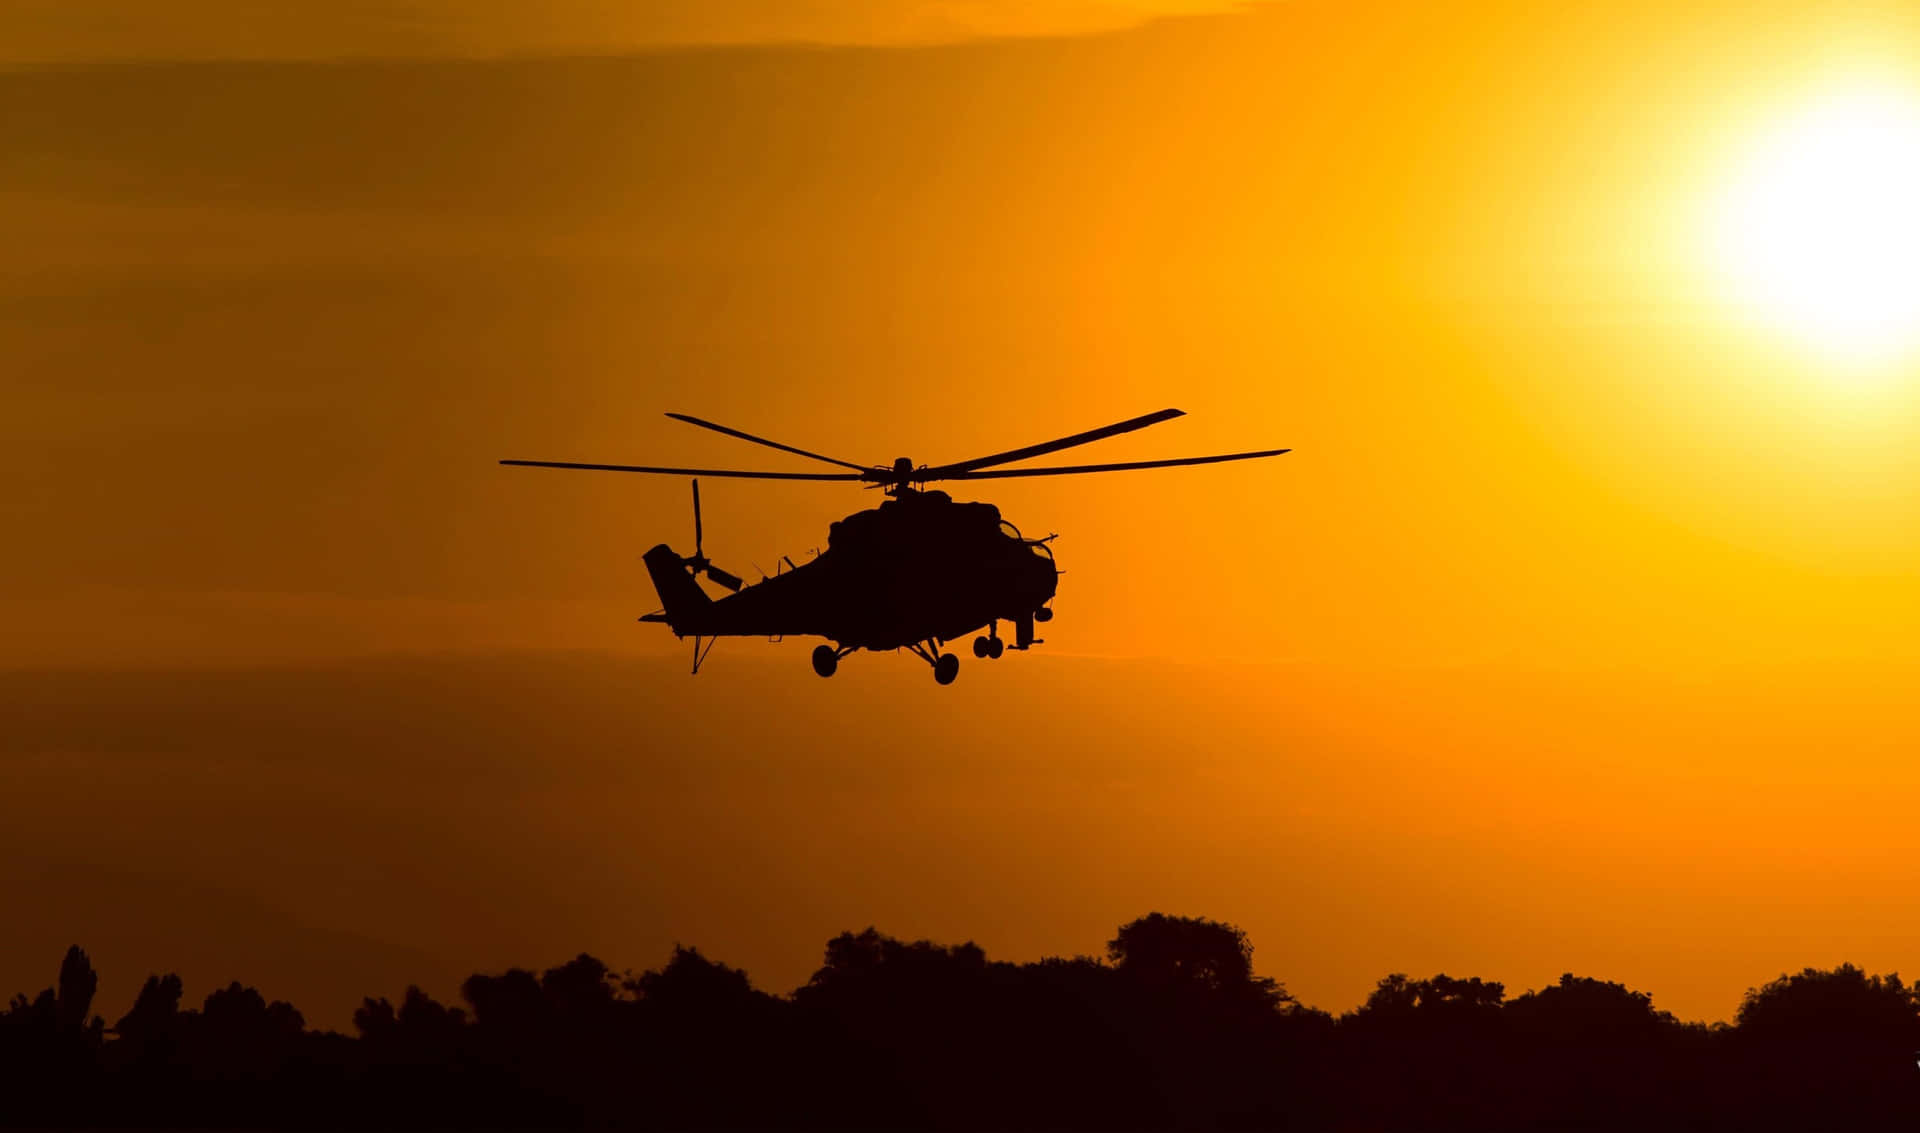 A Helicopter Flying In The Sky At Sunset